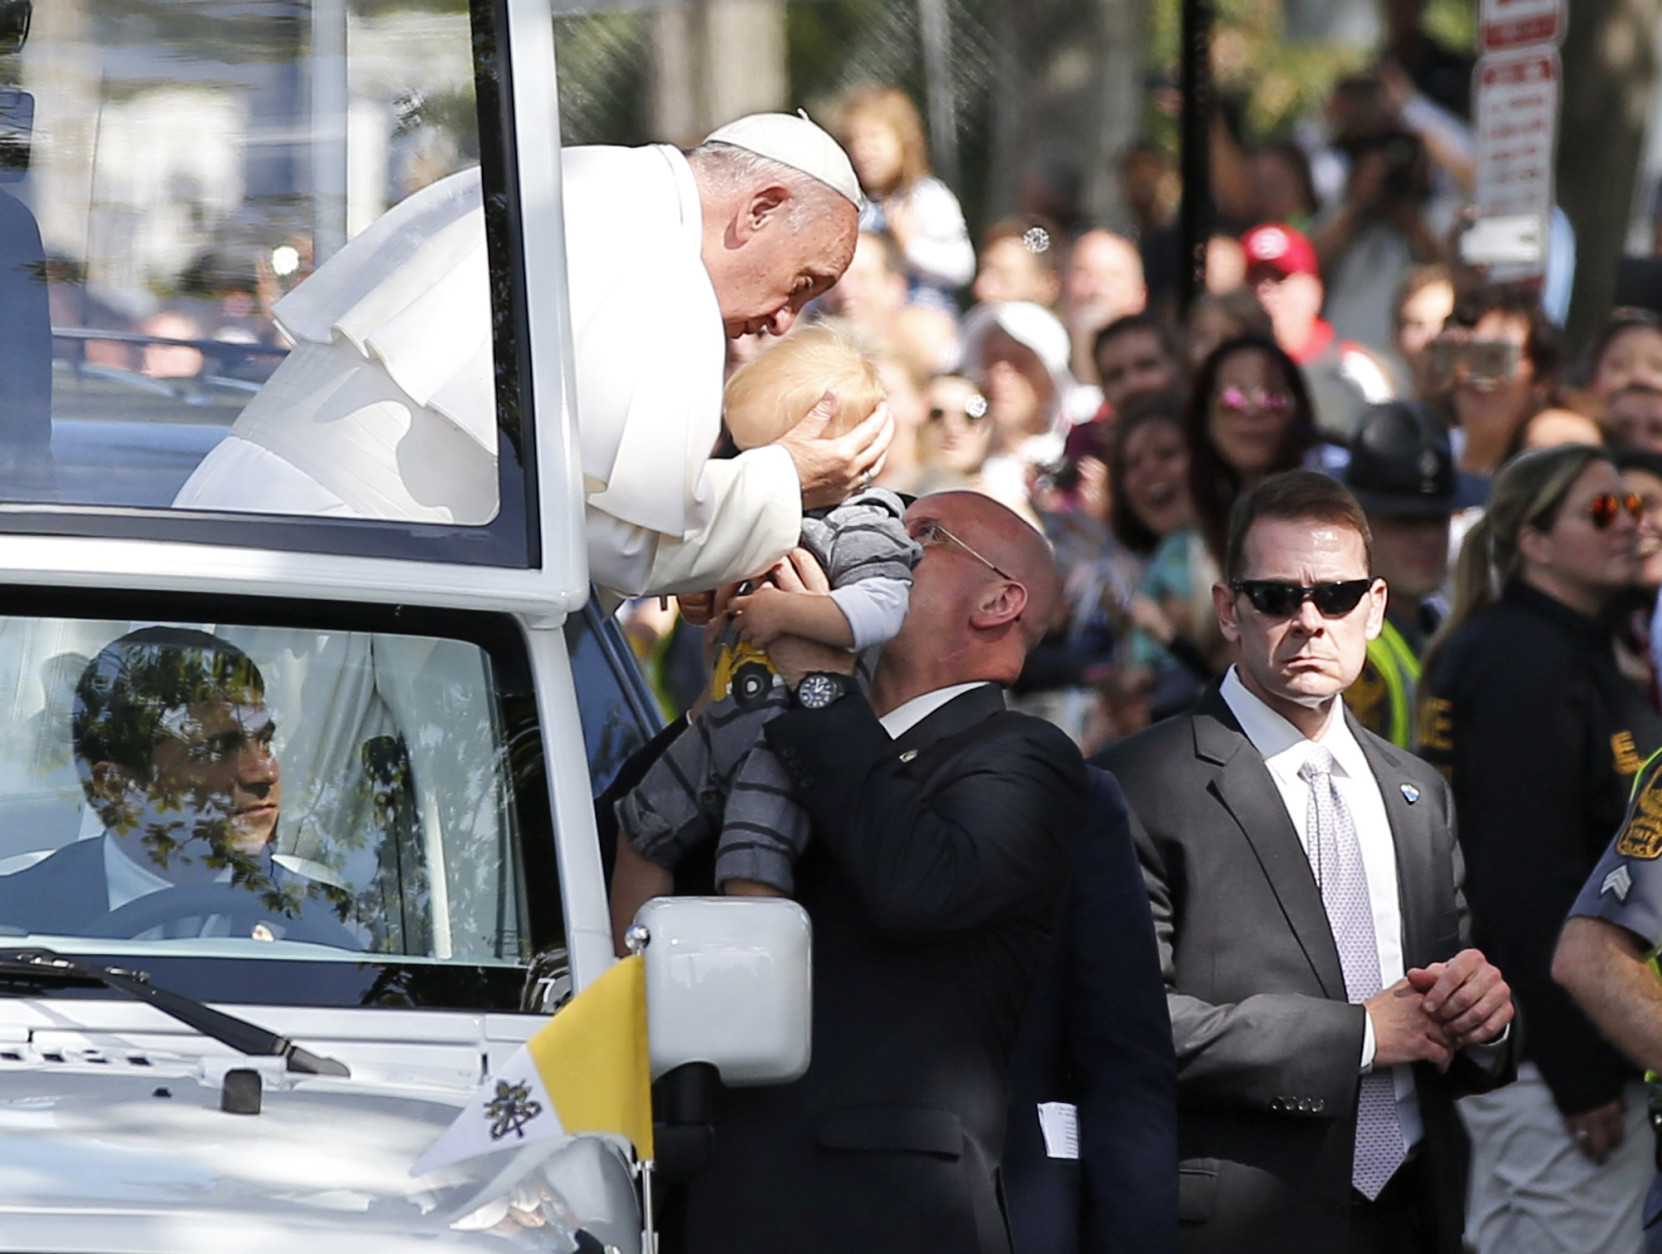 Pope Francis holds the head of a small child as he leans from the popemobile during a parade, Wednesday, Sept. 23, 2015, in Washington. (AP Photo/Alex Brandon, Pool)